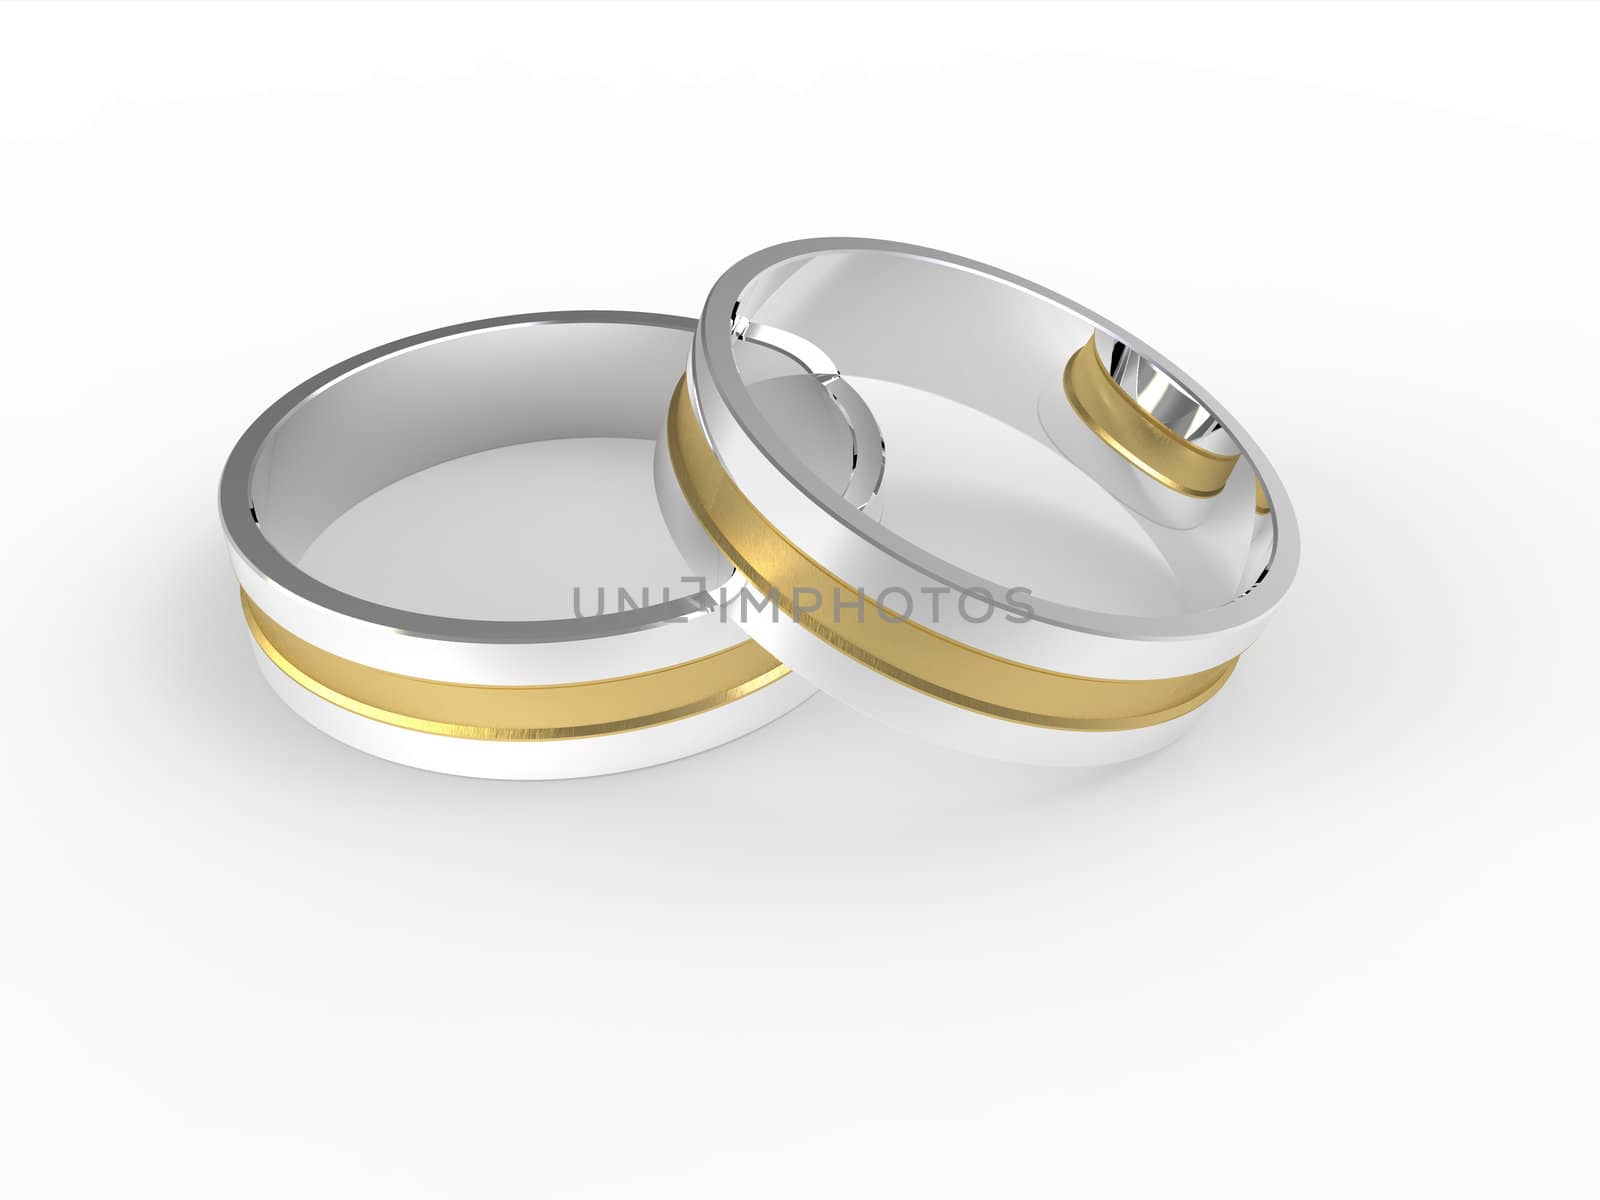 Golden and silver wedding rings isolated on white background